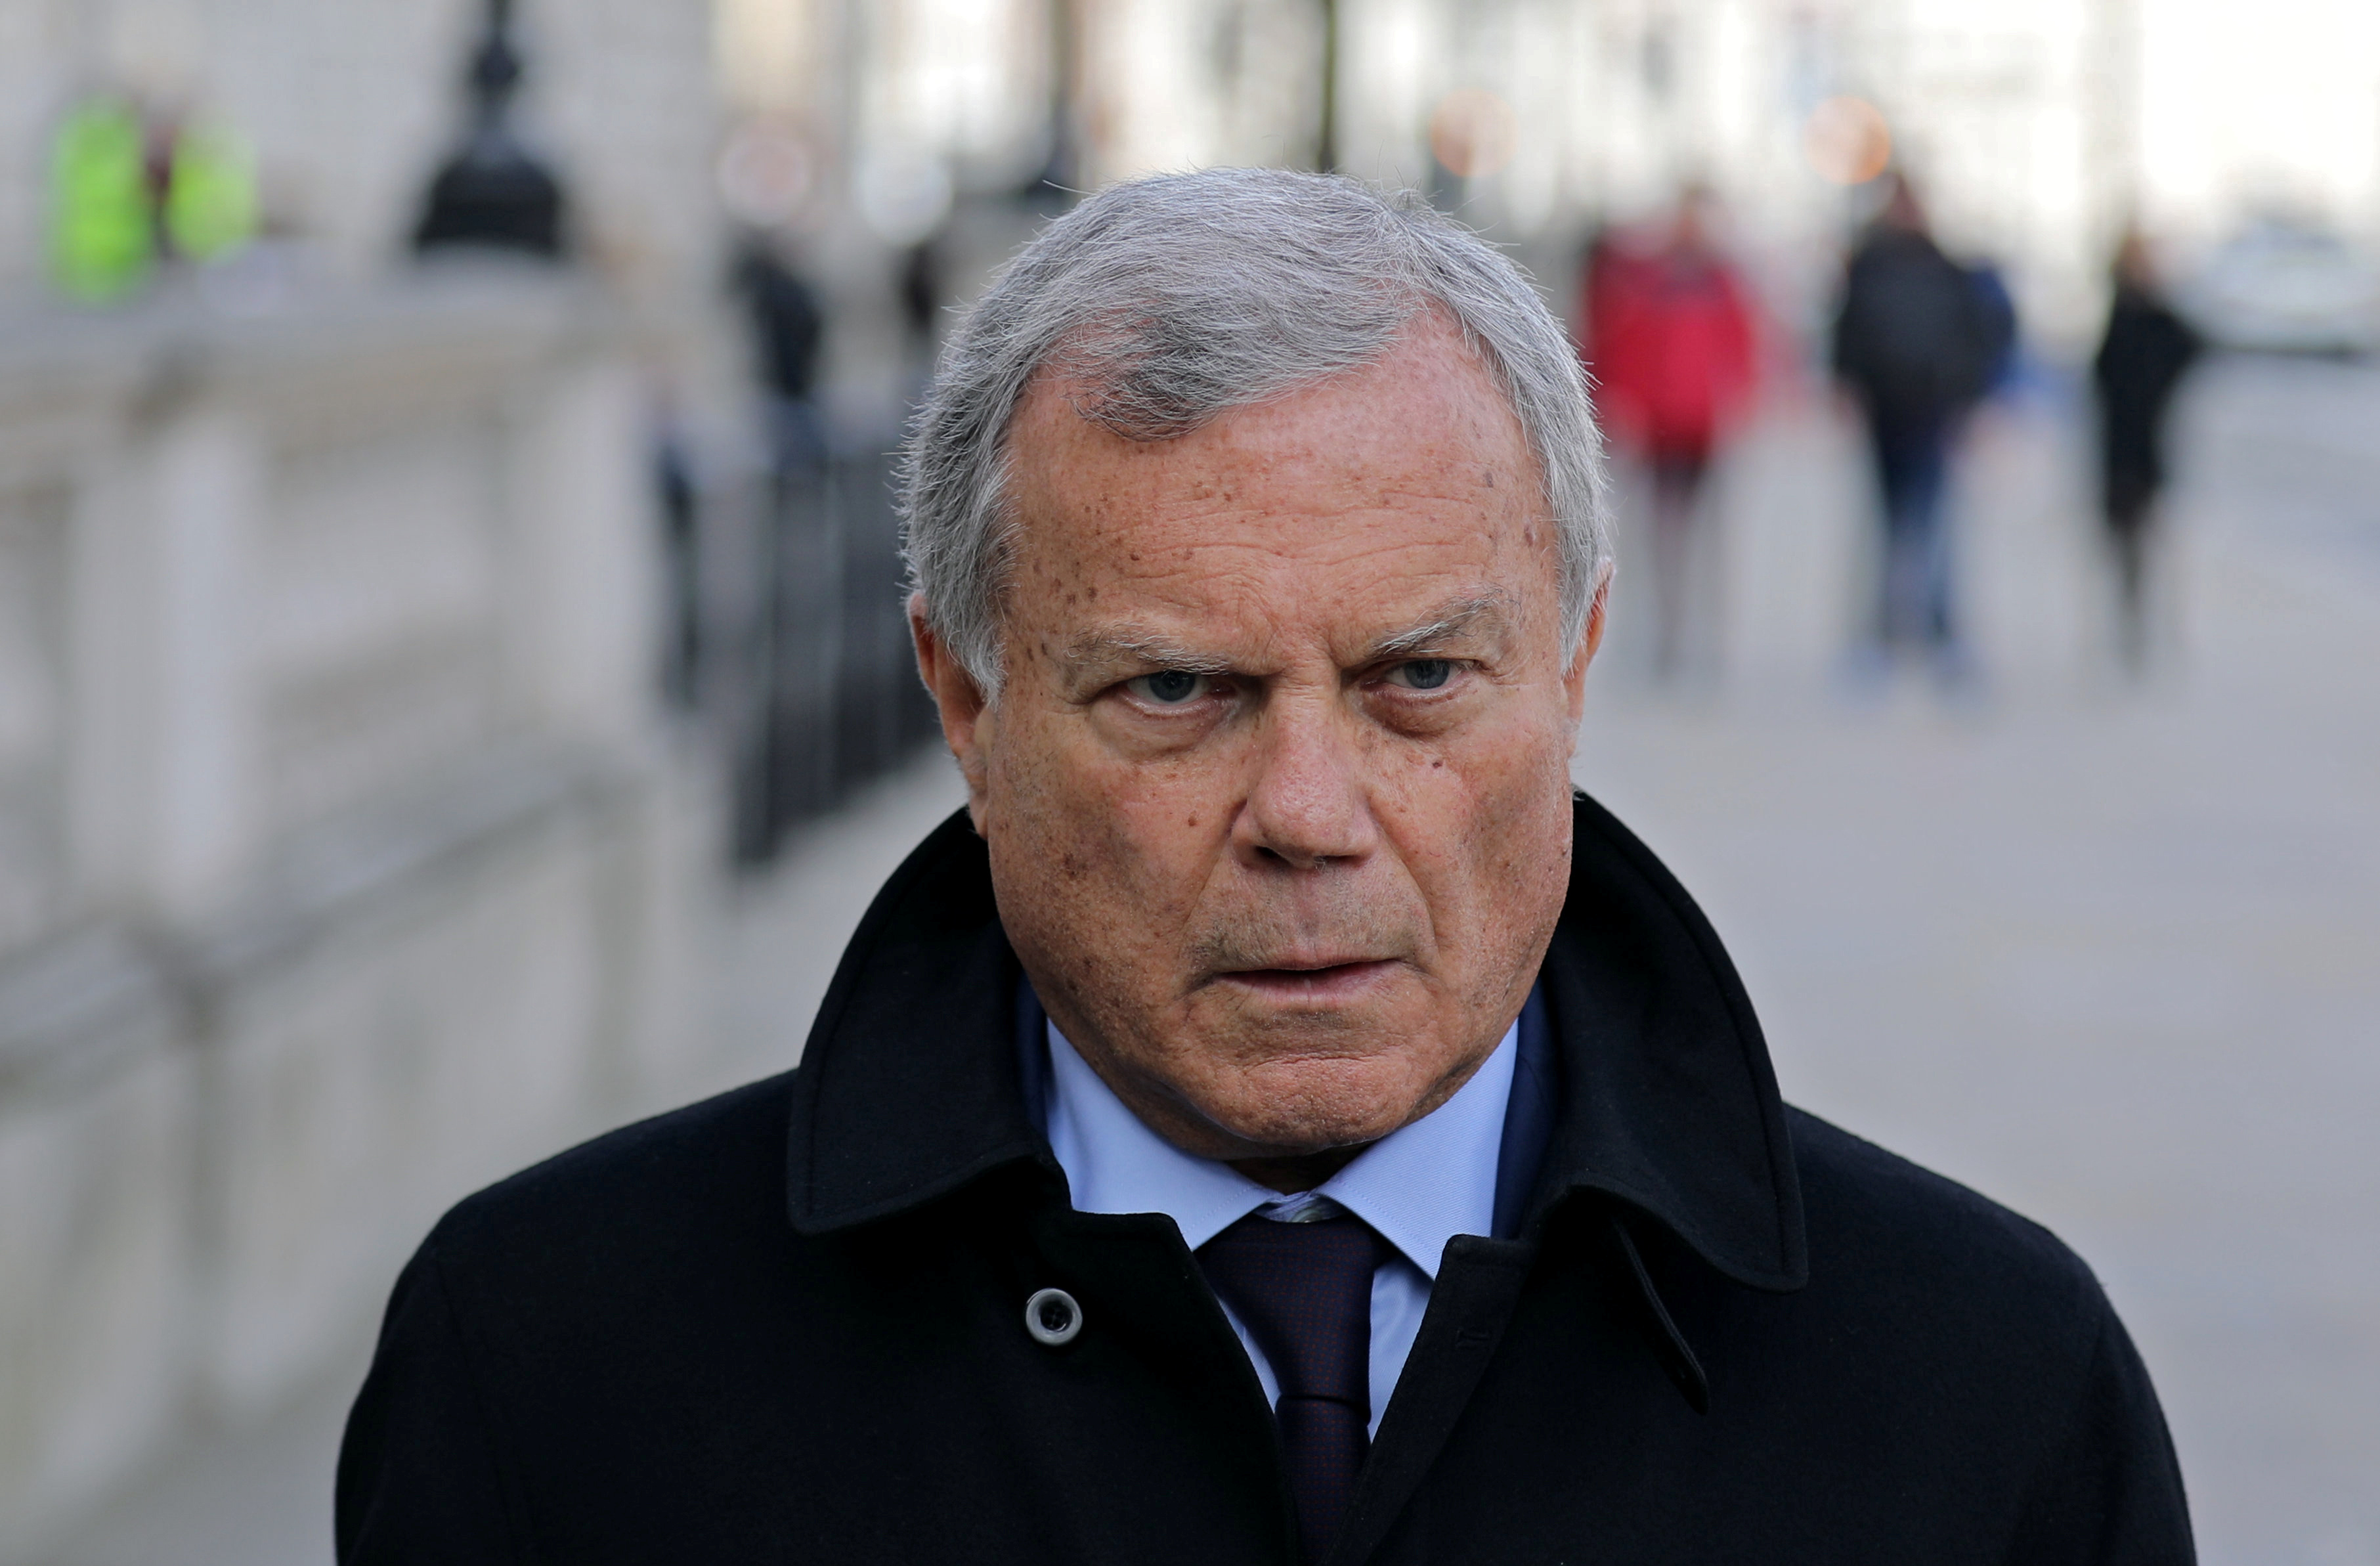 Sir Martin Sorrell walks down Whitehall, as a meeting takes place addressing the government's response to the coronavirus outbreak, at Cabinet Office in London